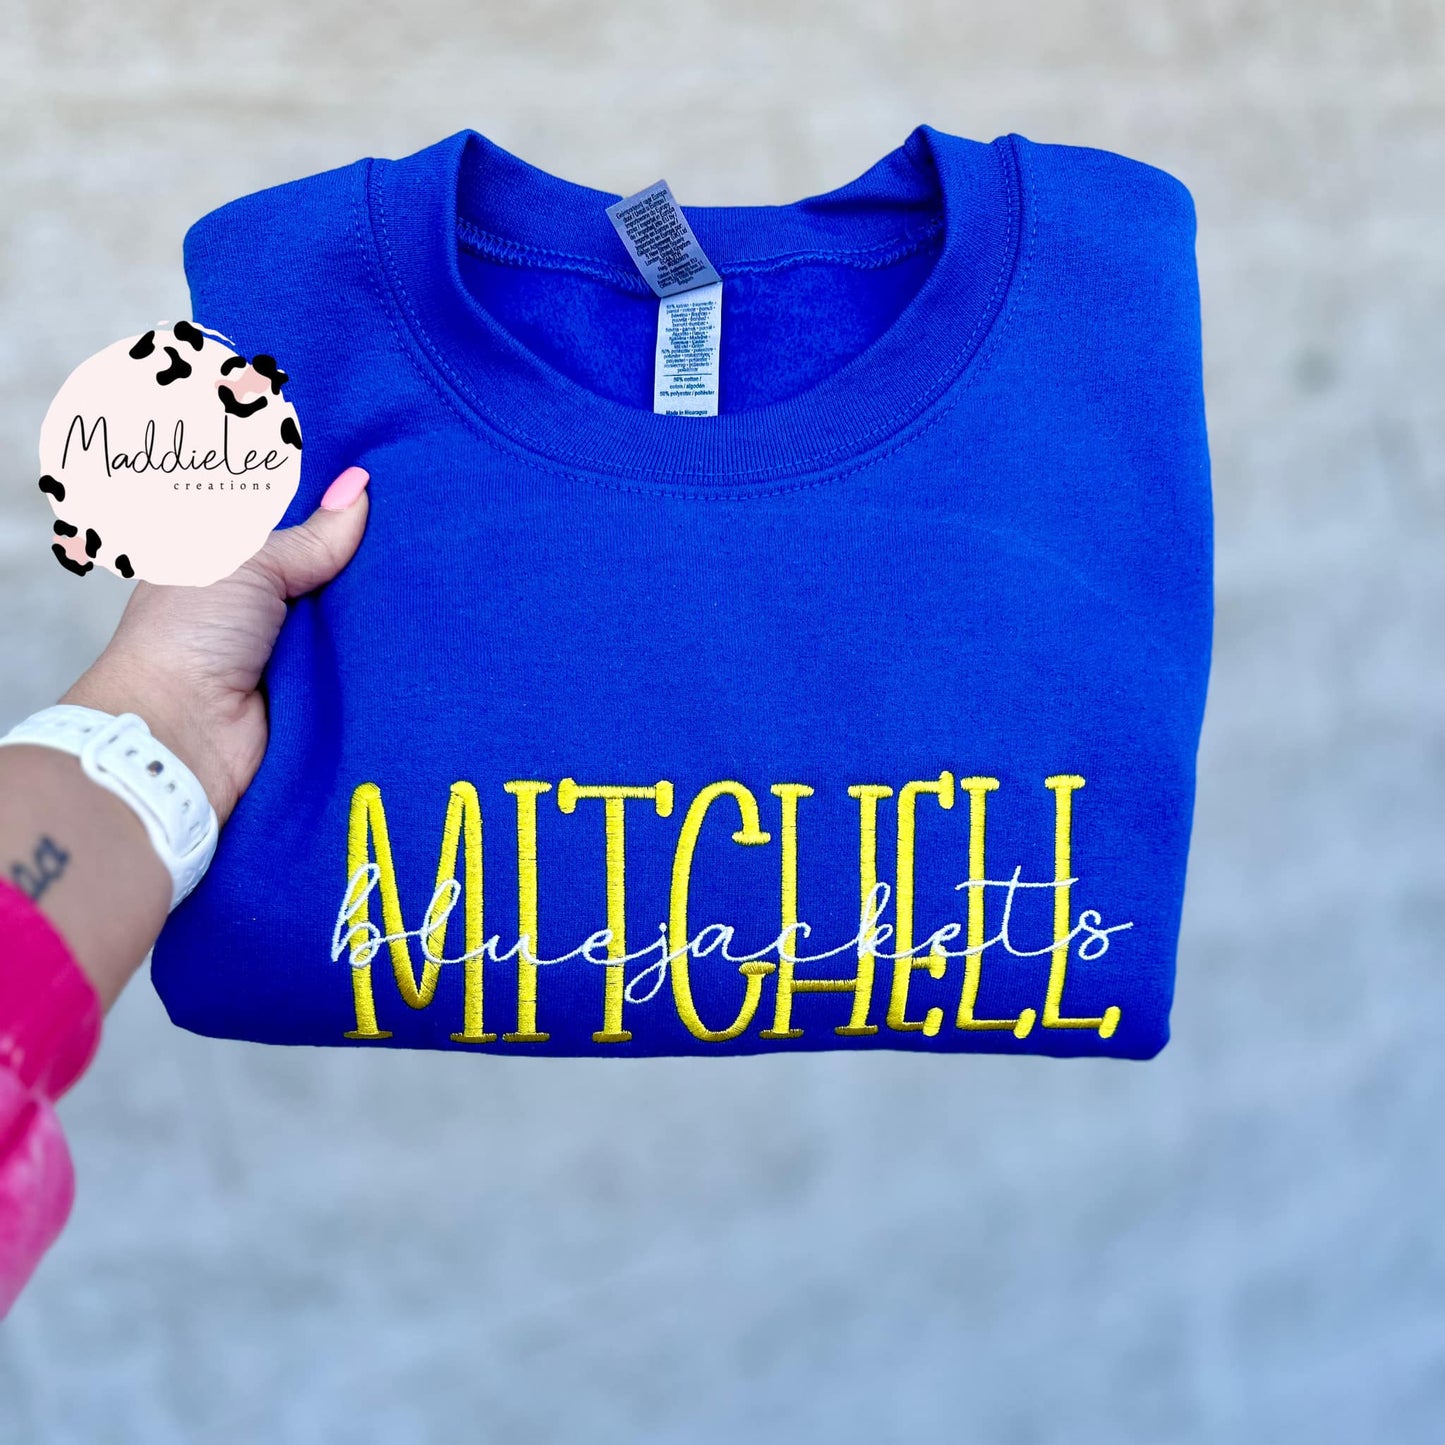 Mitchell BlueJackets Embroidered Crewneck